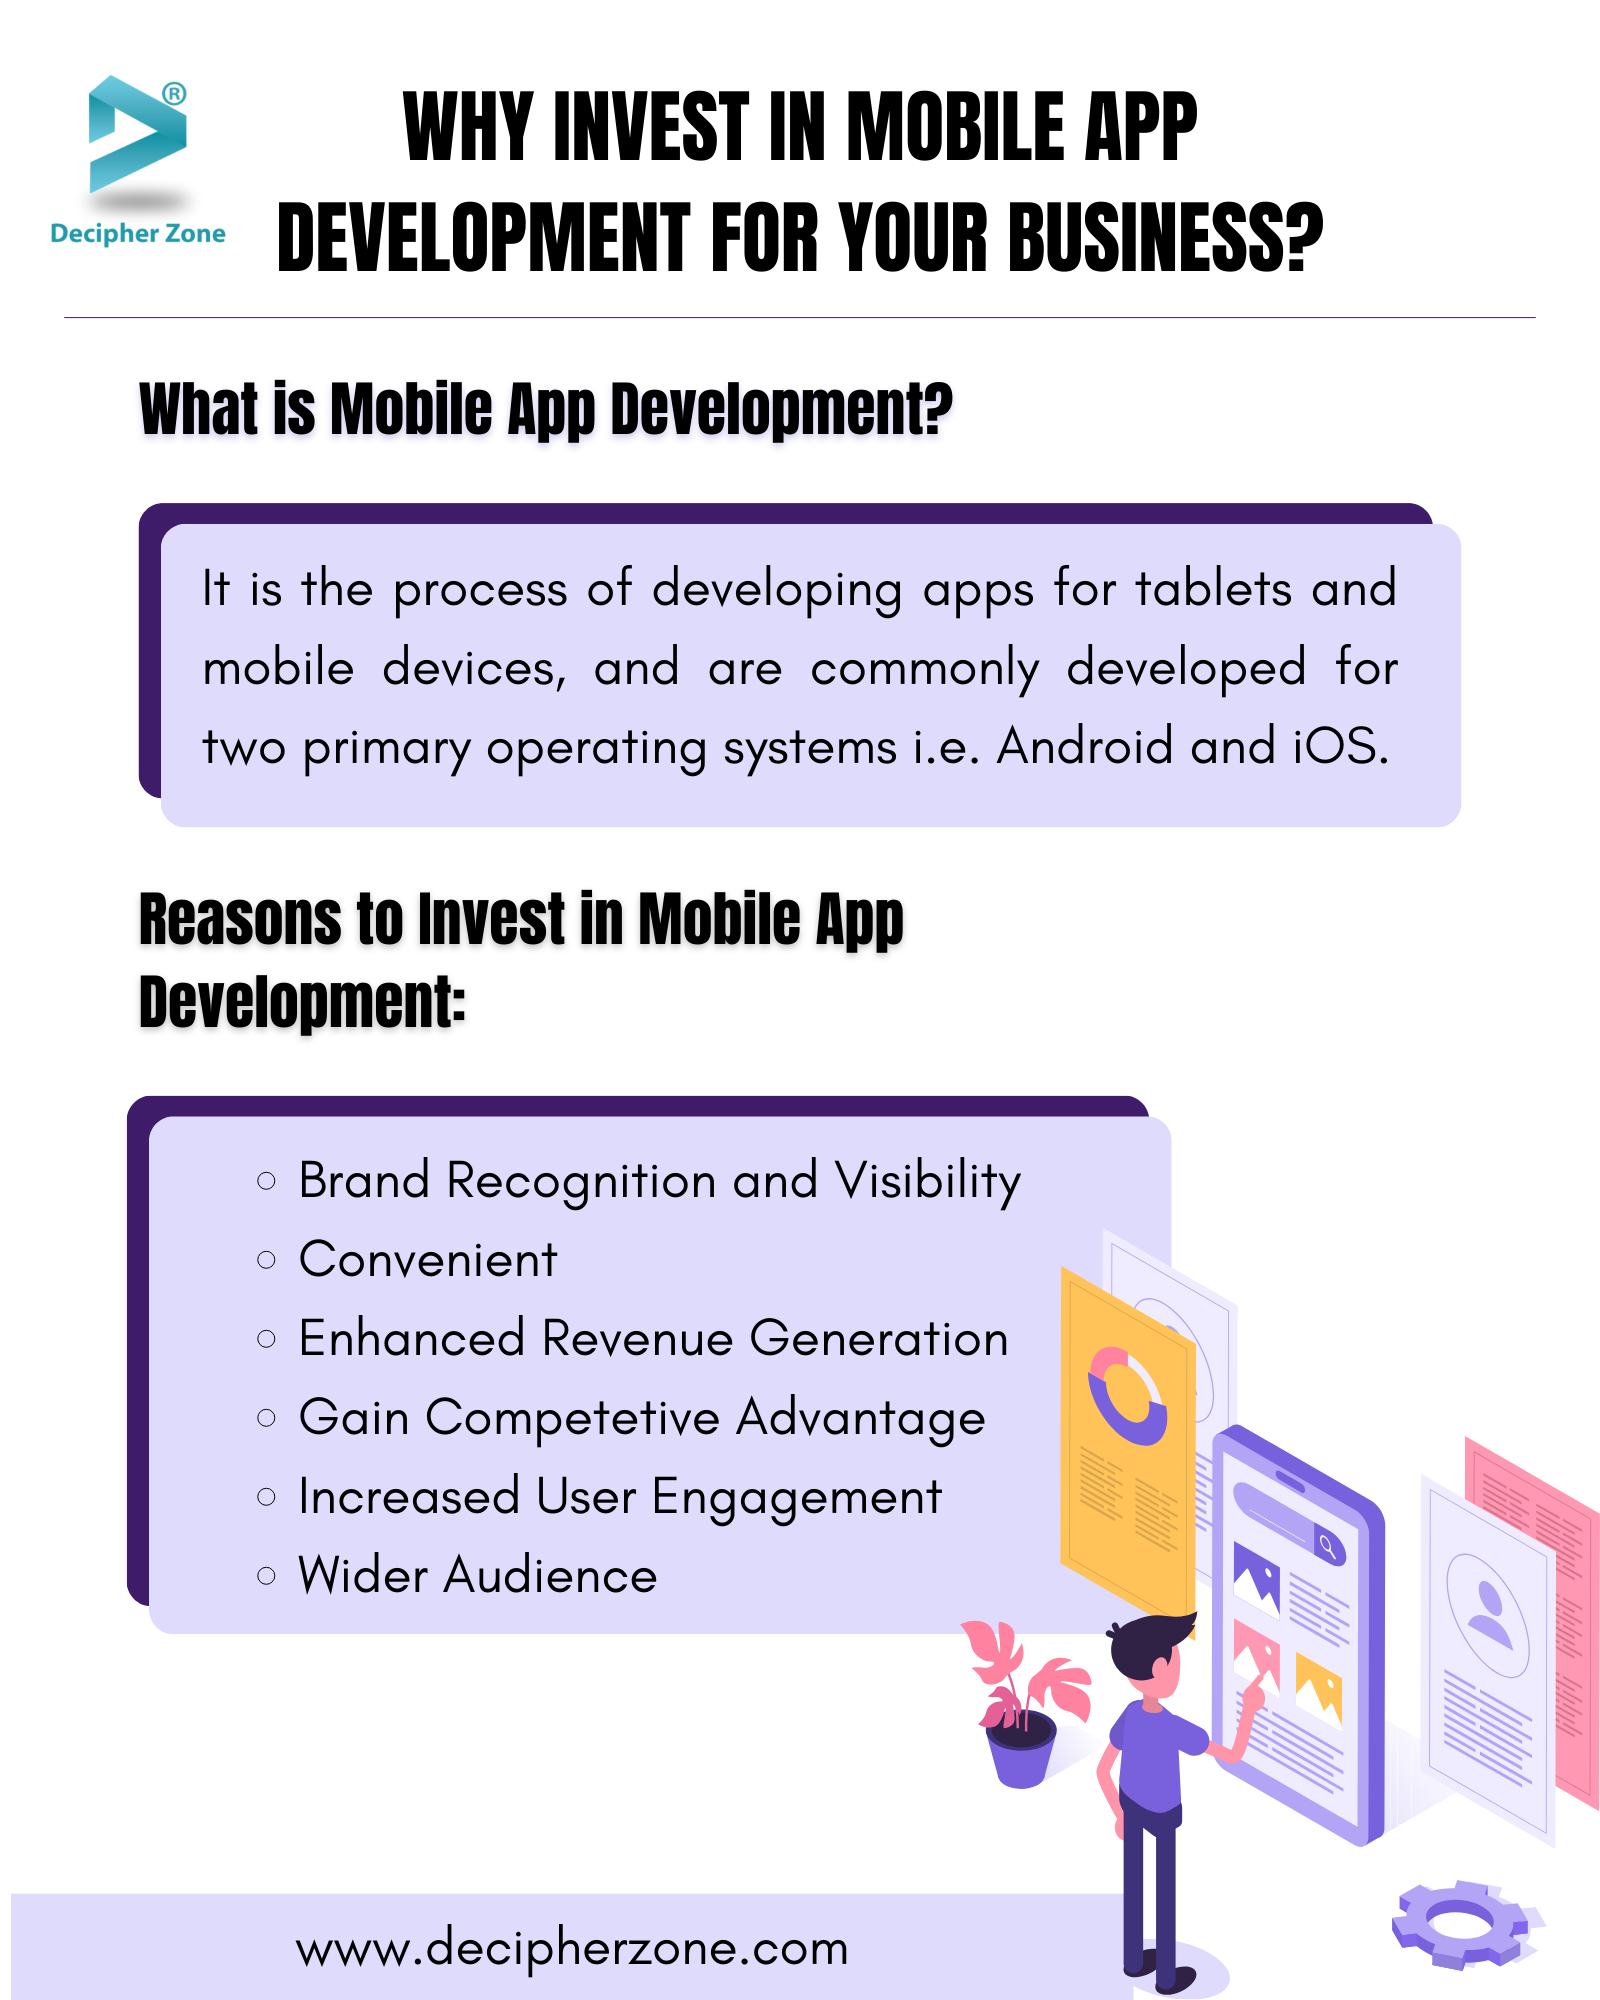 Why Invest in Mobile App Development